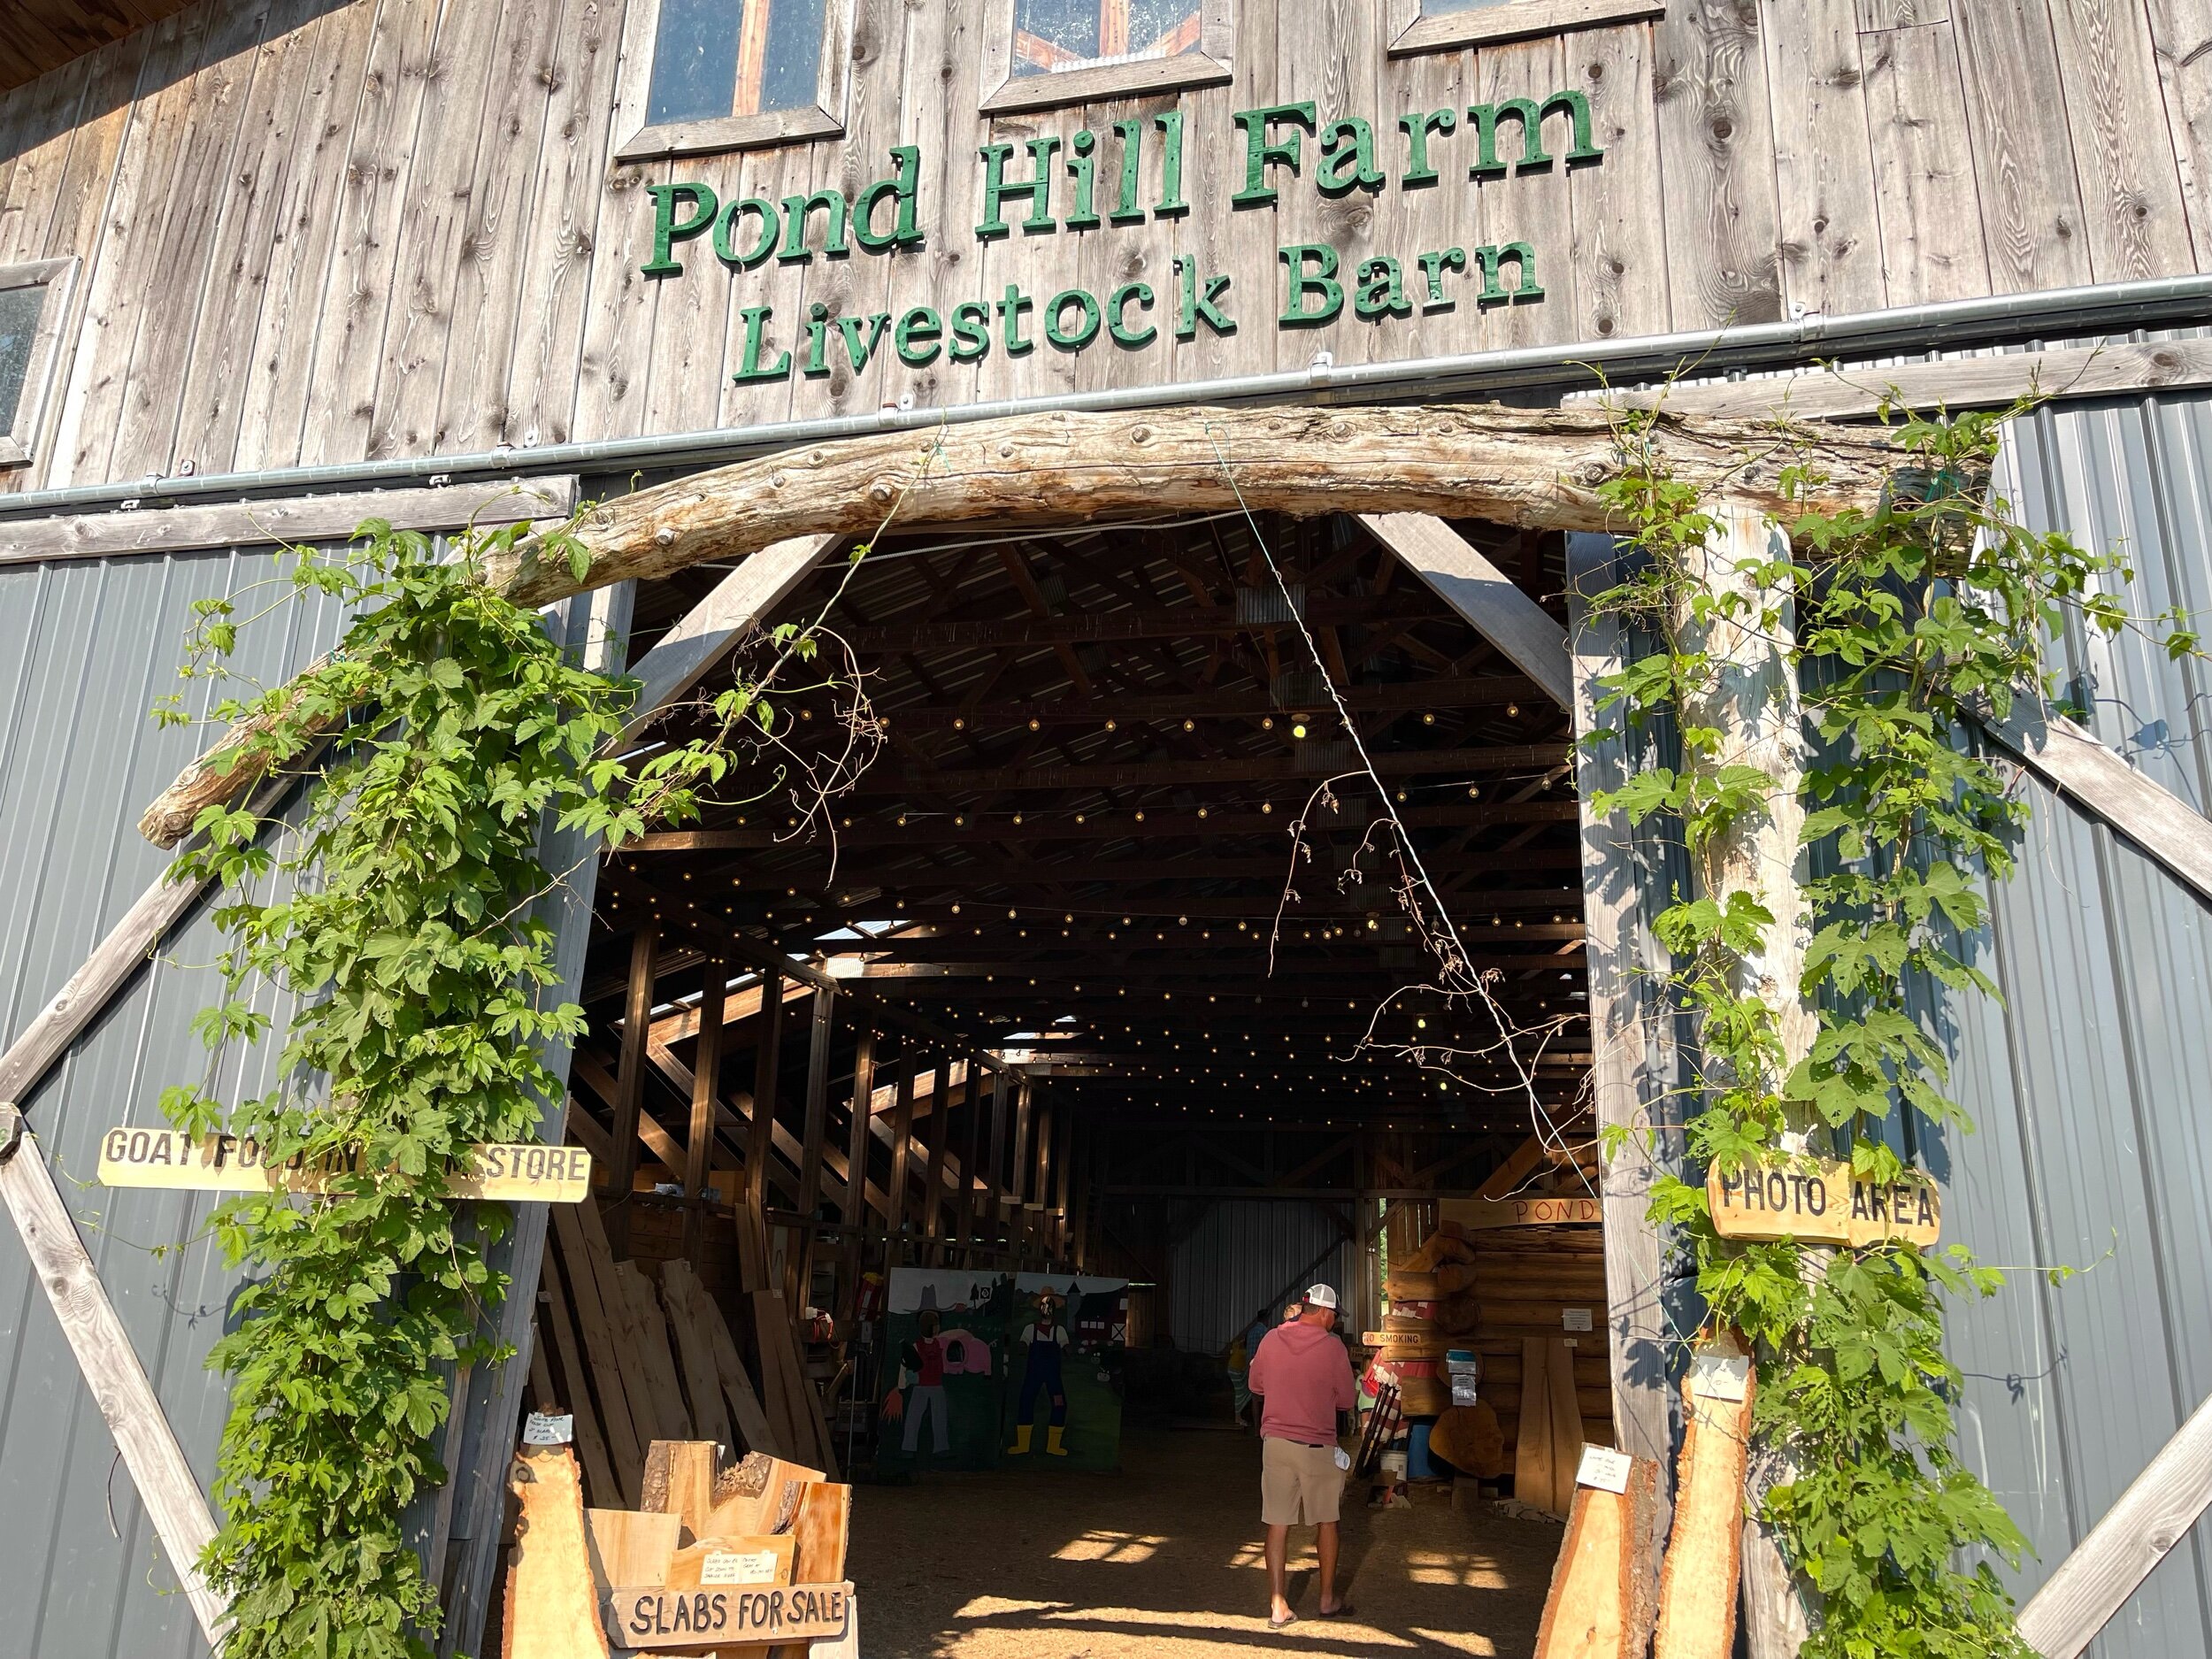   Pond Hill Farm  was an unexpected discovery as we traveled the  Trail of Trees  in  Harbor Springs.  Pond Hill Farm is a winery, brewery, music venue, petting zoo, fresh fruit &amp; vegetable market, and brick oven pizzeria—and that's just on the d